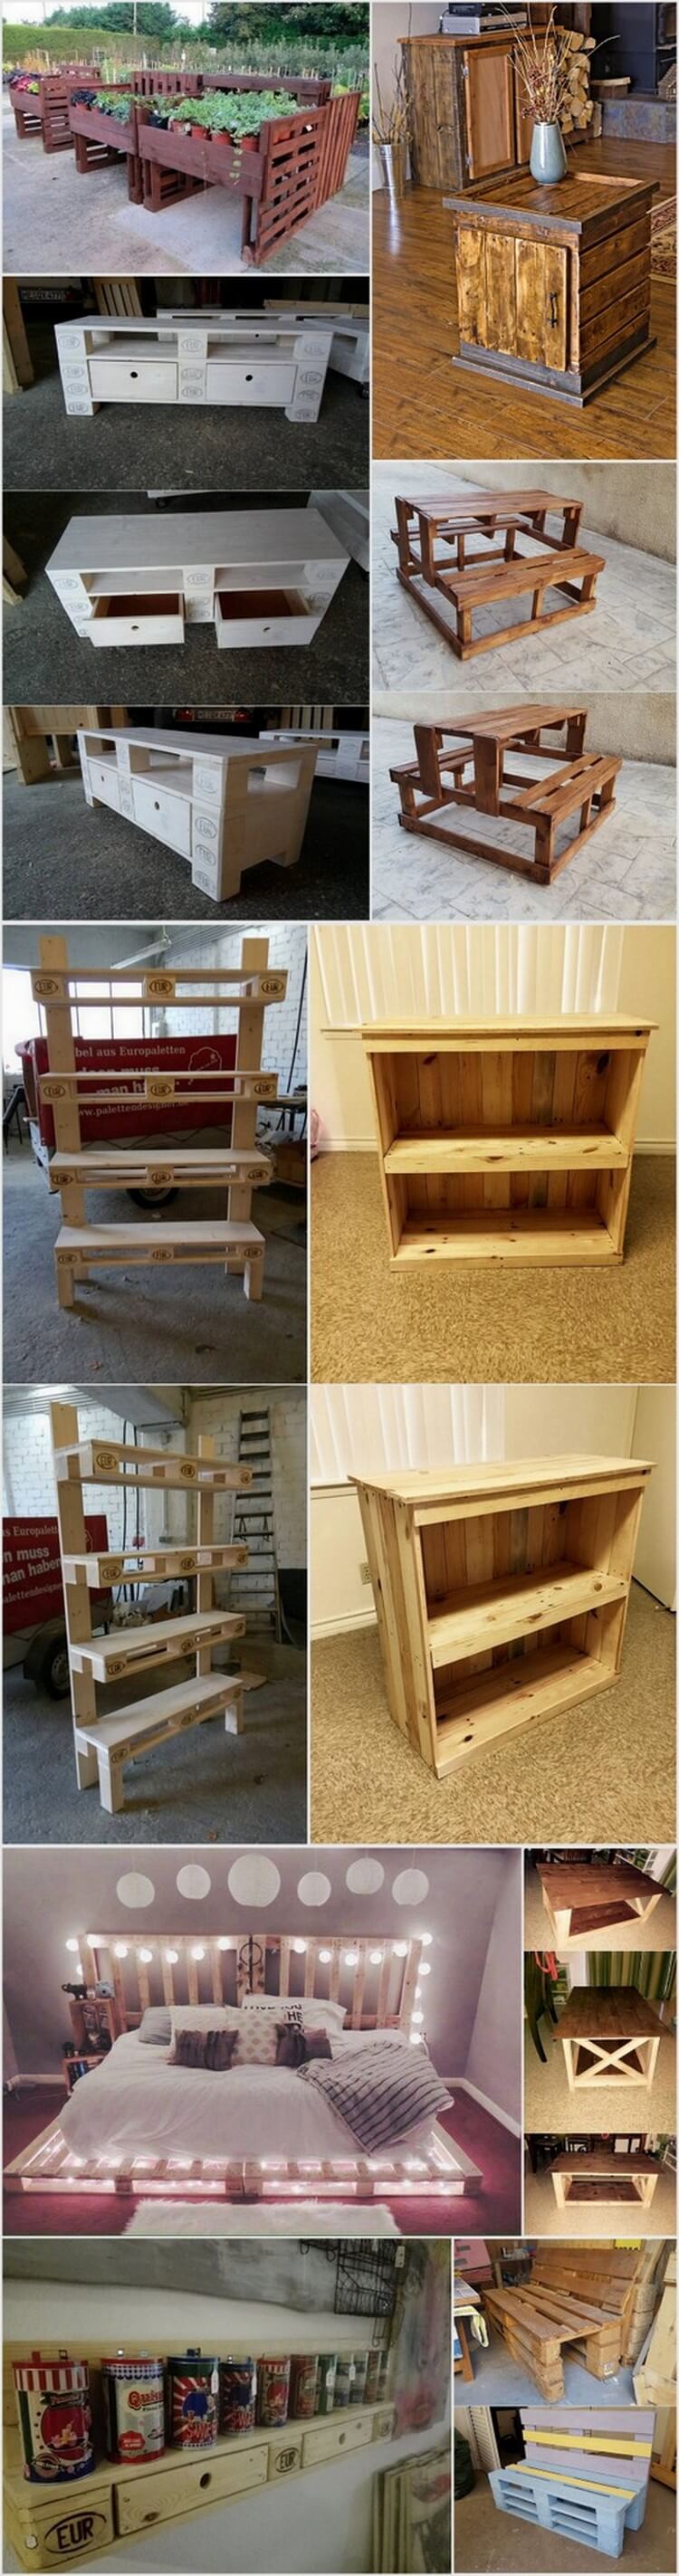 Amazing Ideas for Recycling Old Wood Pallets